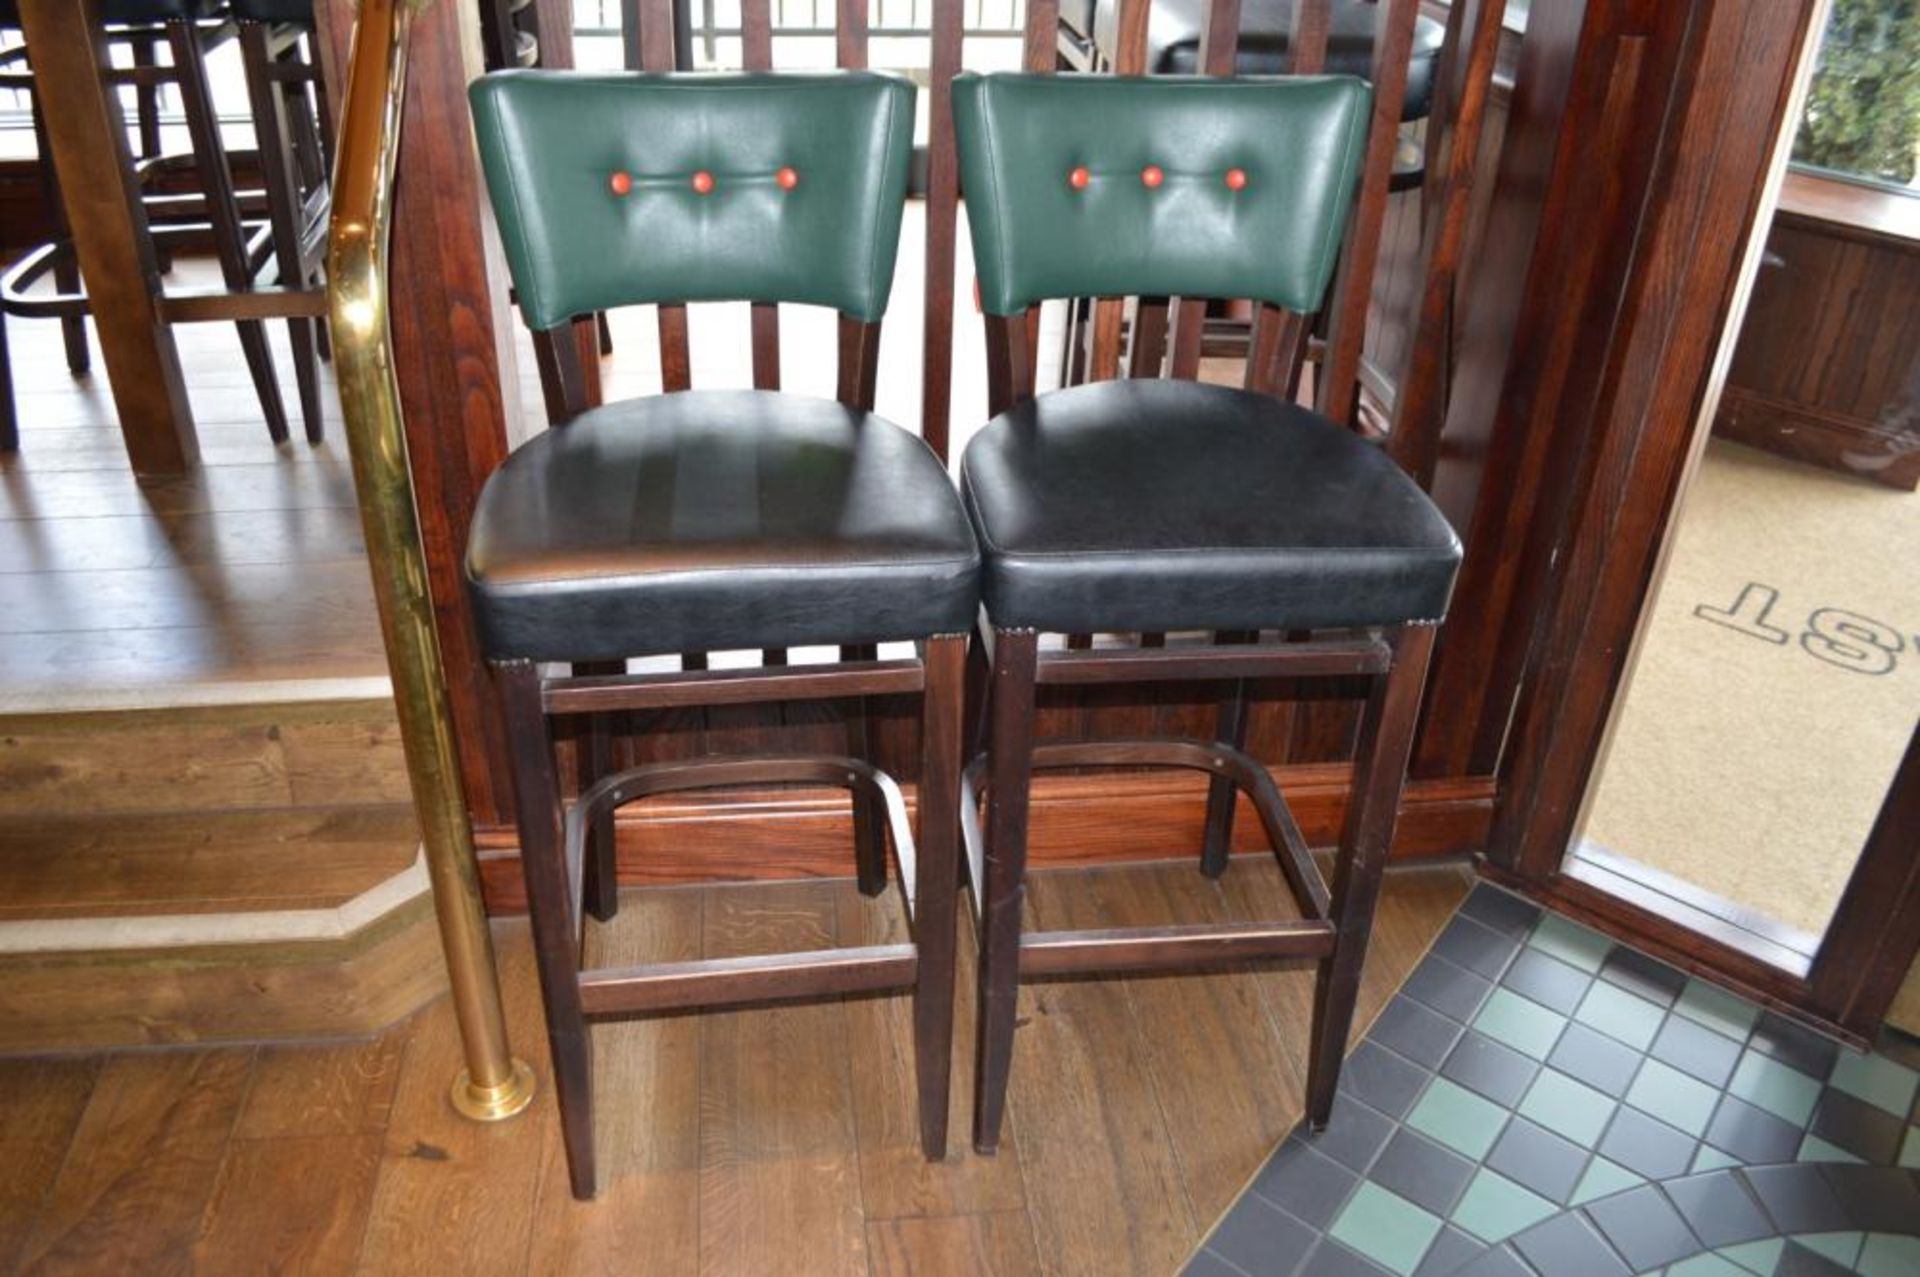 4 x Contemporary Button Back Restaurant Bar Stools - Upholstered in a Quality Green and Black Faux - Bild 4 aus 7